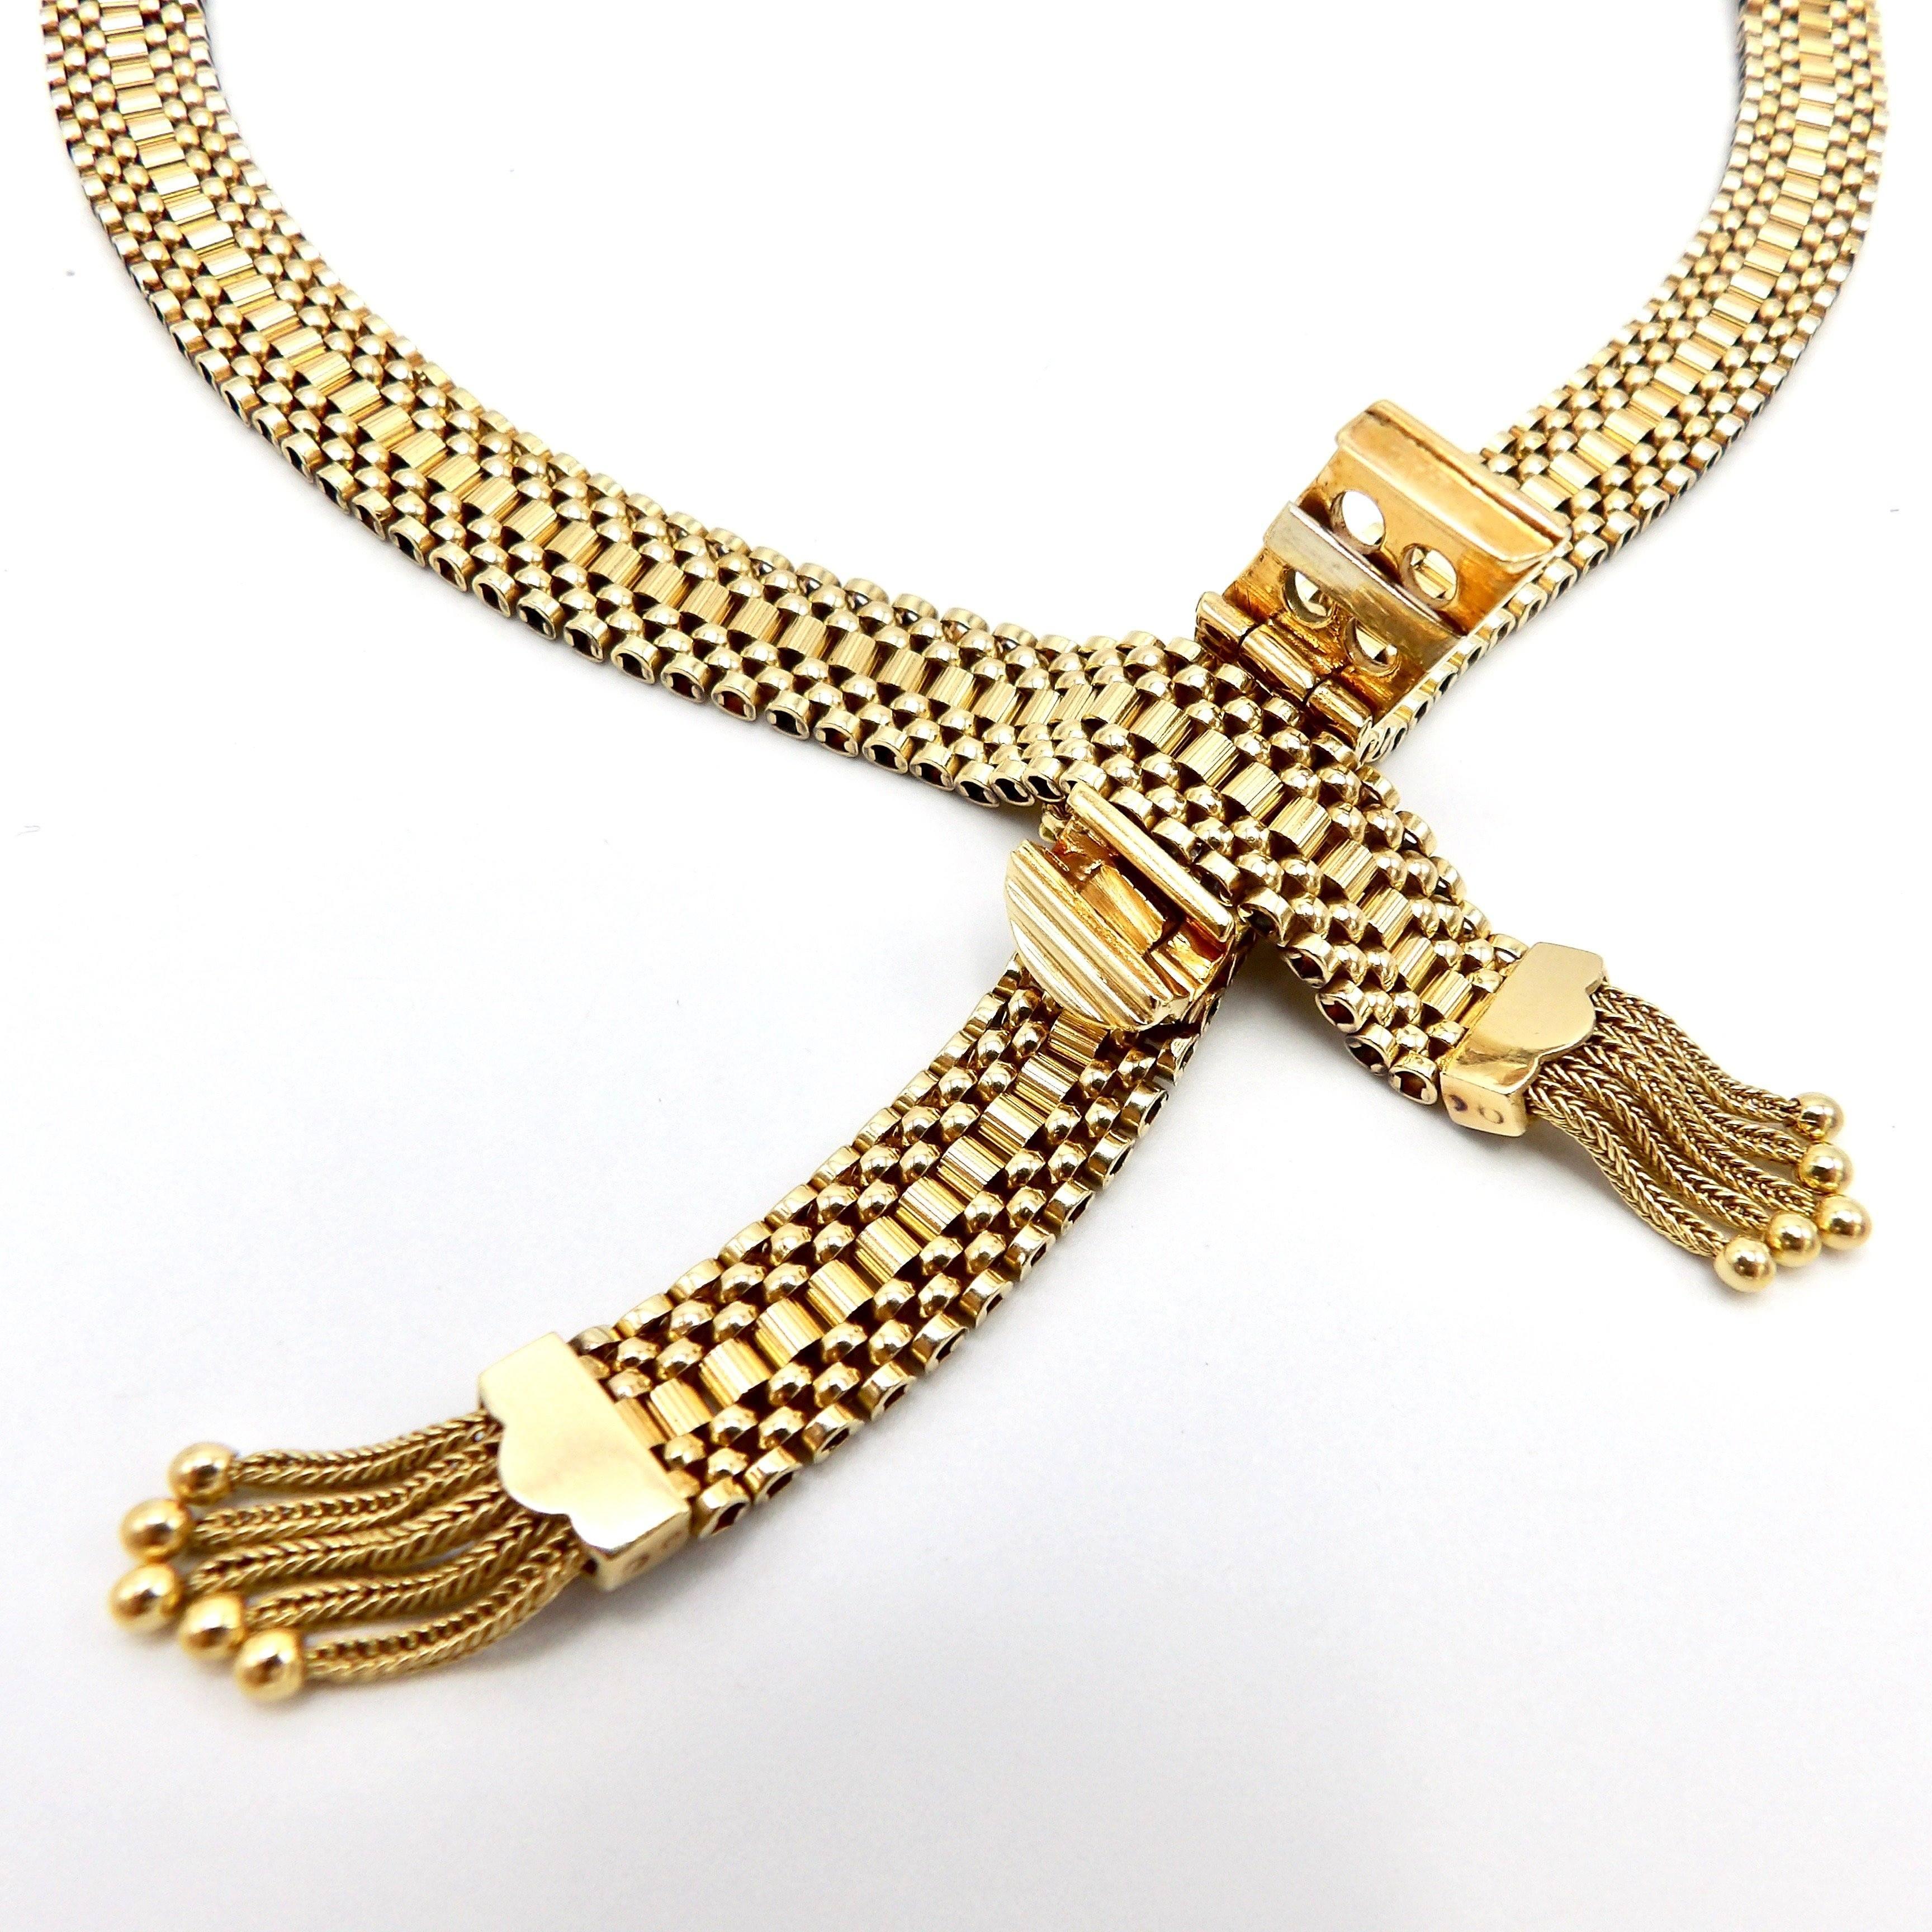 Victorian Revival 14K Woven Gold Necklace with Buckle Clasp and Tassels For Sale 1